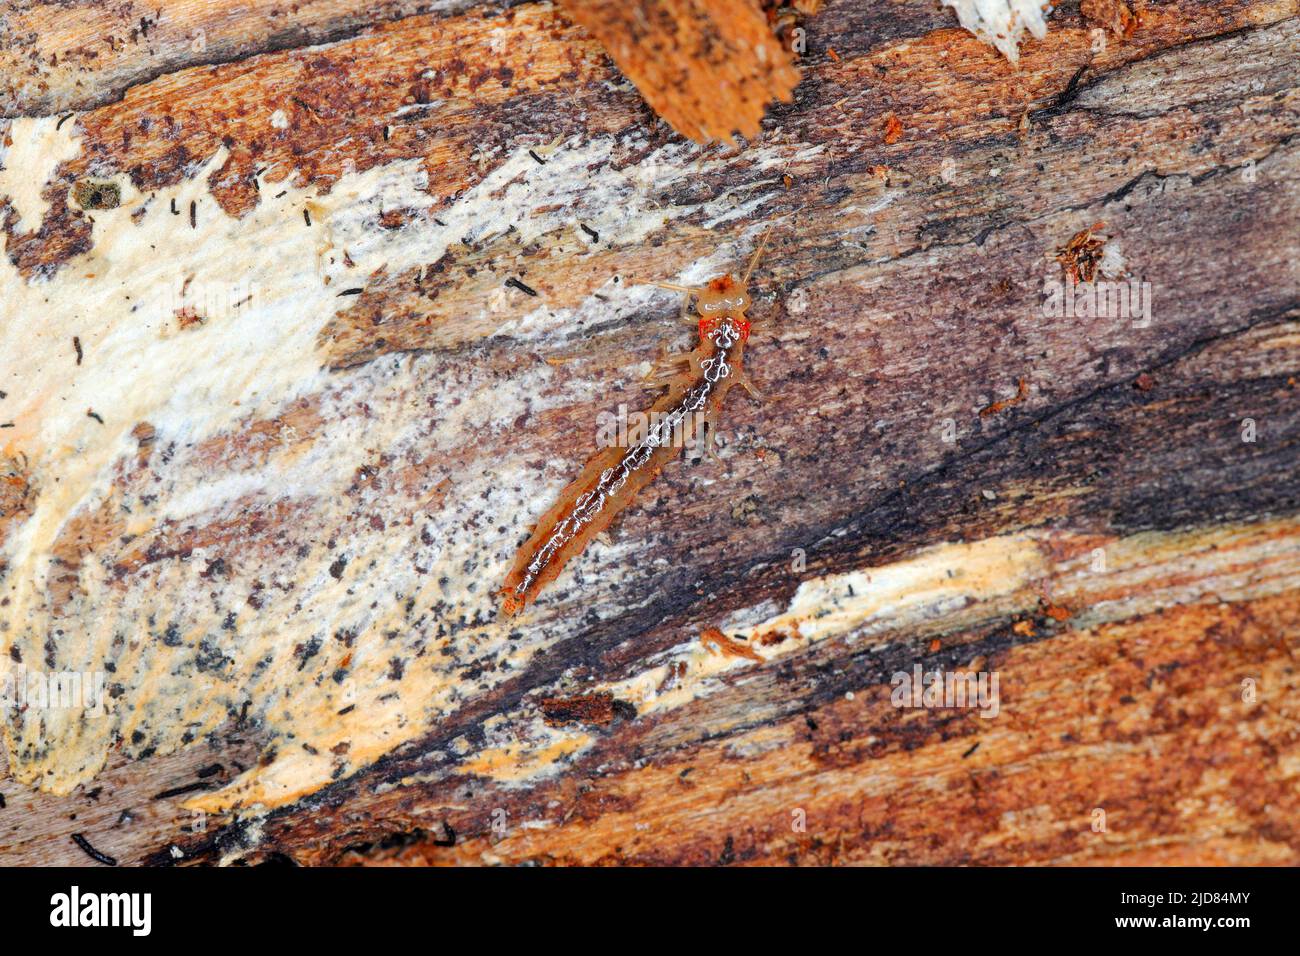 the larva of the beetle of the rove beetles family (Staphylinidae) under bark. They are agile pest hunters Stock Photo